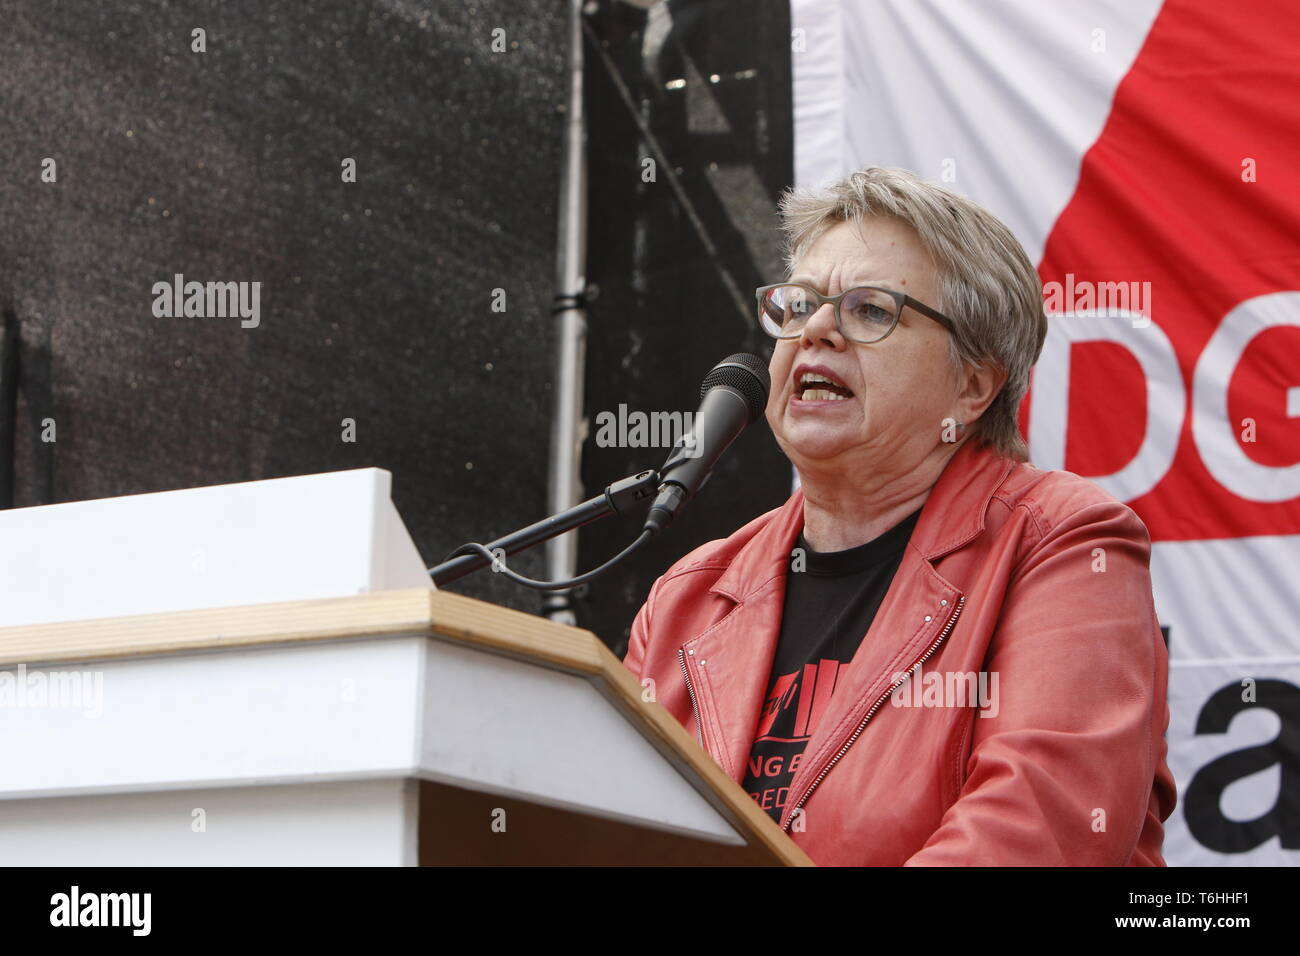 Frankfurt, Germany. 01st May, 2019. Marlis Tepe, the federal chairwoman of the GEW (Education and Science Workers' Union), addresses the rally. Several thousand members of Trade Unions and left parties marched through Frankfurt on their traditional 1. May protest. The march ended with a rally at the Roemerberg, in the centre of the old part of Frankfurt in front of the Frankfurt city-hall Roemer. Credit: Michael Debets/Pacific Press/Alamy Live News Stock Photo